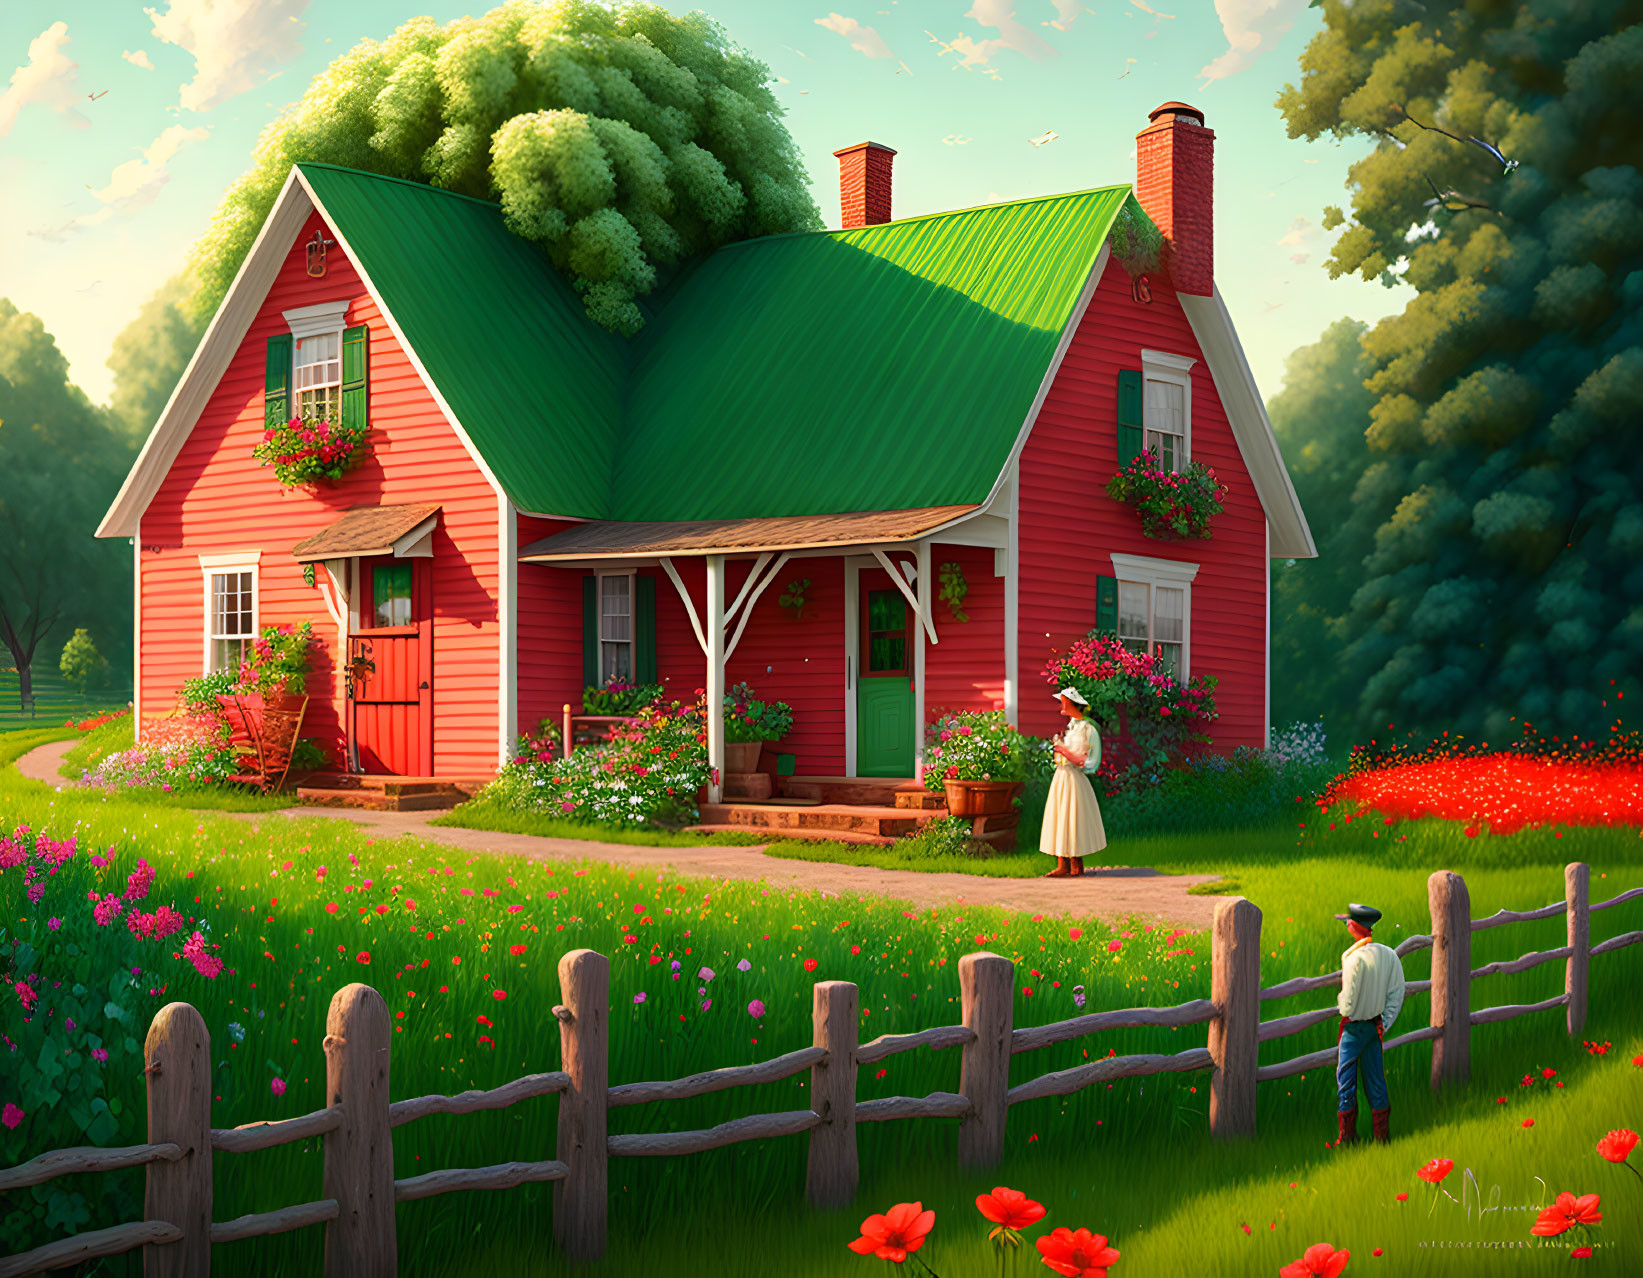 Red cottage with green roof, woman in vintage attire, child by wooden fence